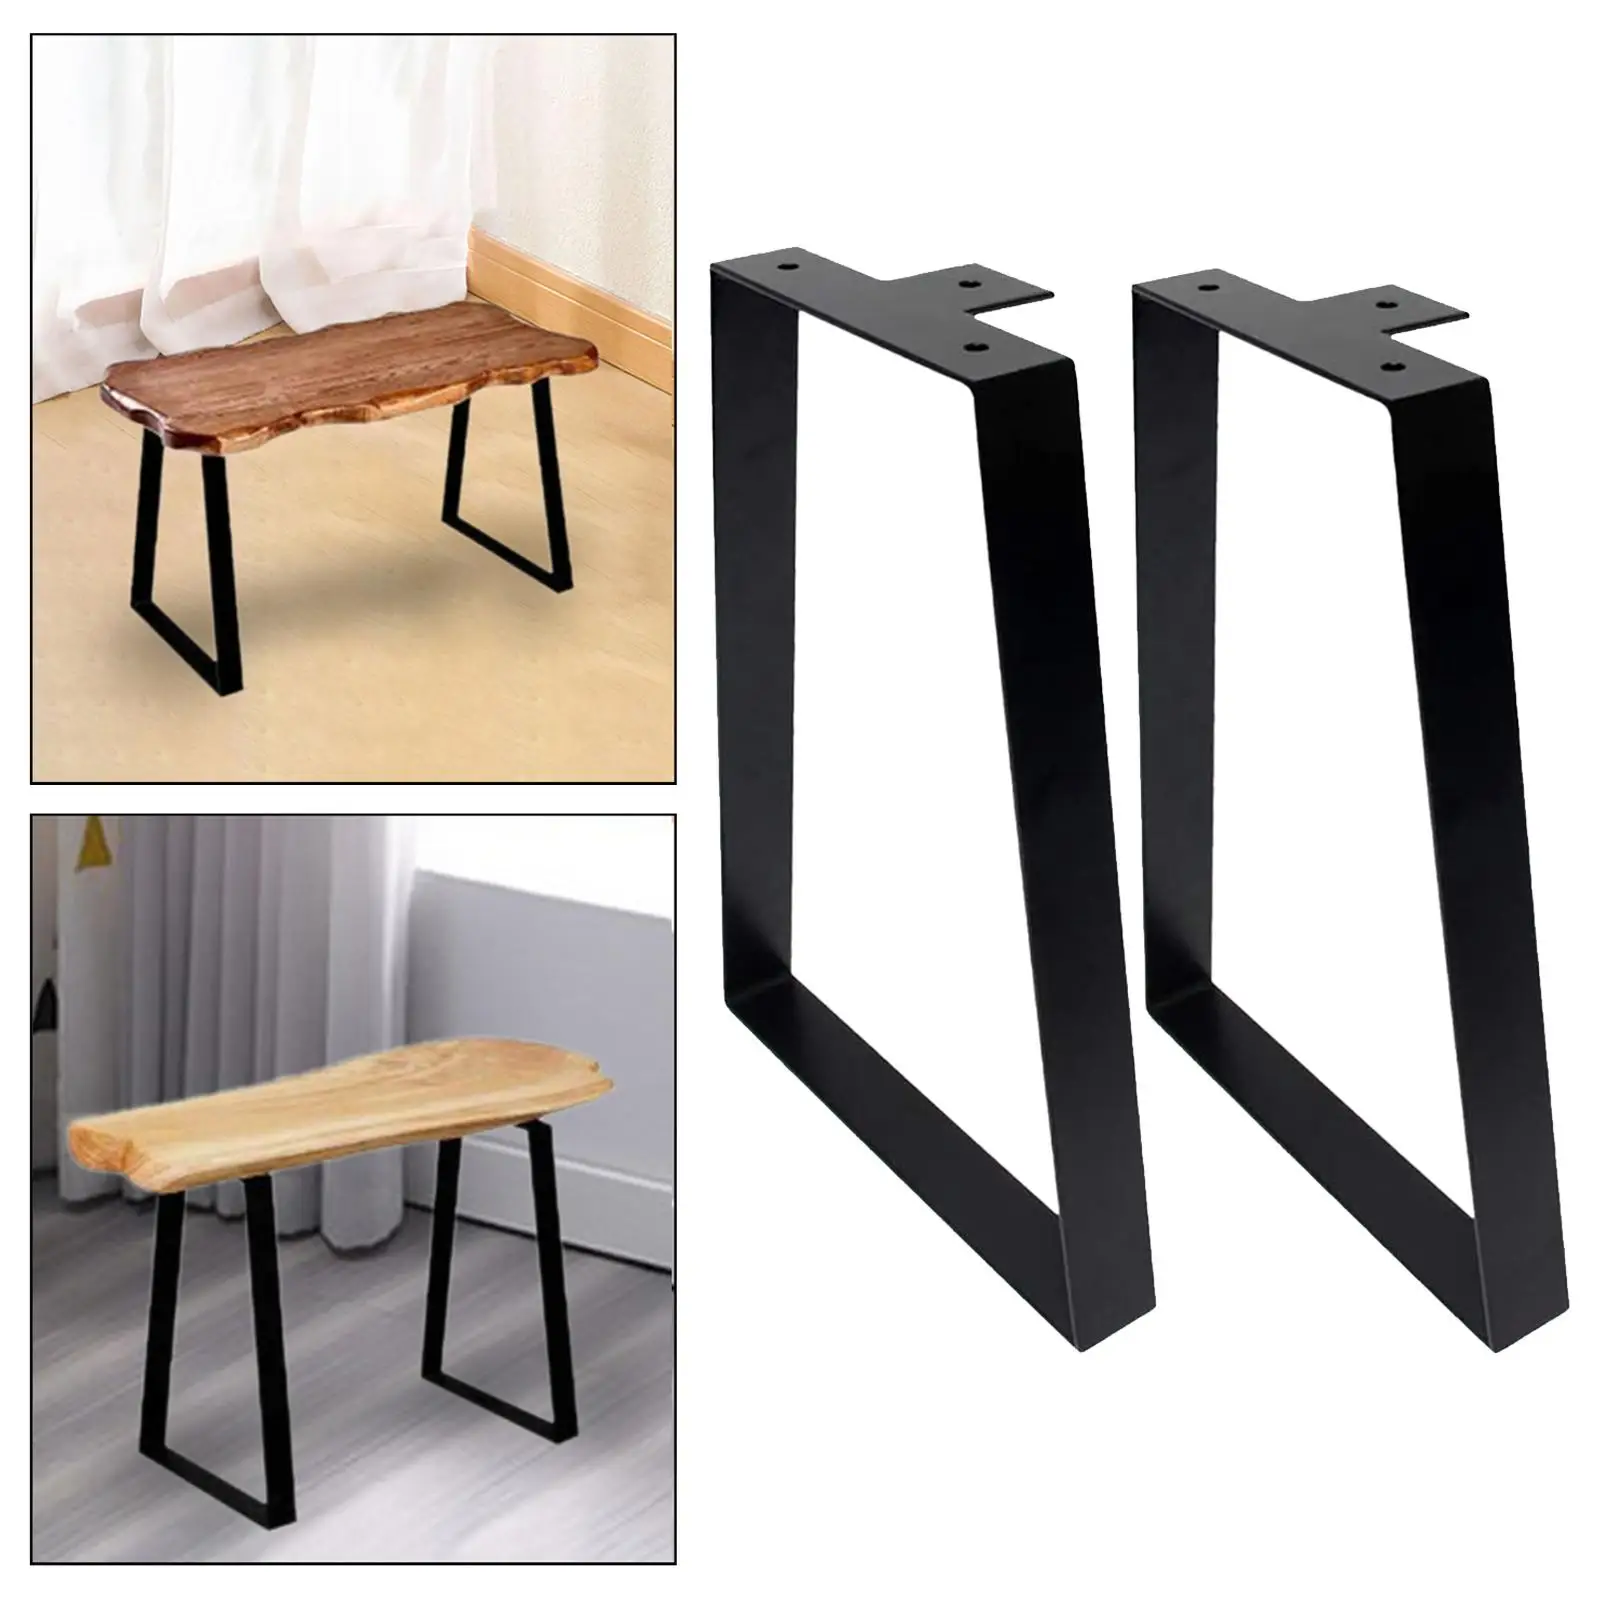 2x Trapezoid Table Legs Iron Desk Legs Furniture Legs Rustic Replacement Bench Legs for Coffee Tables Office Night Stands